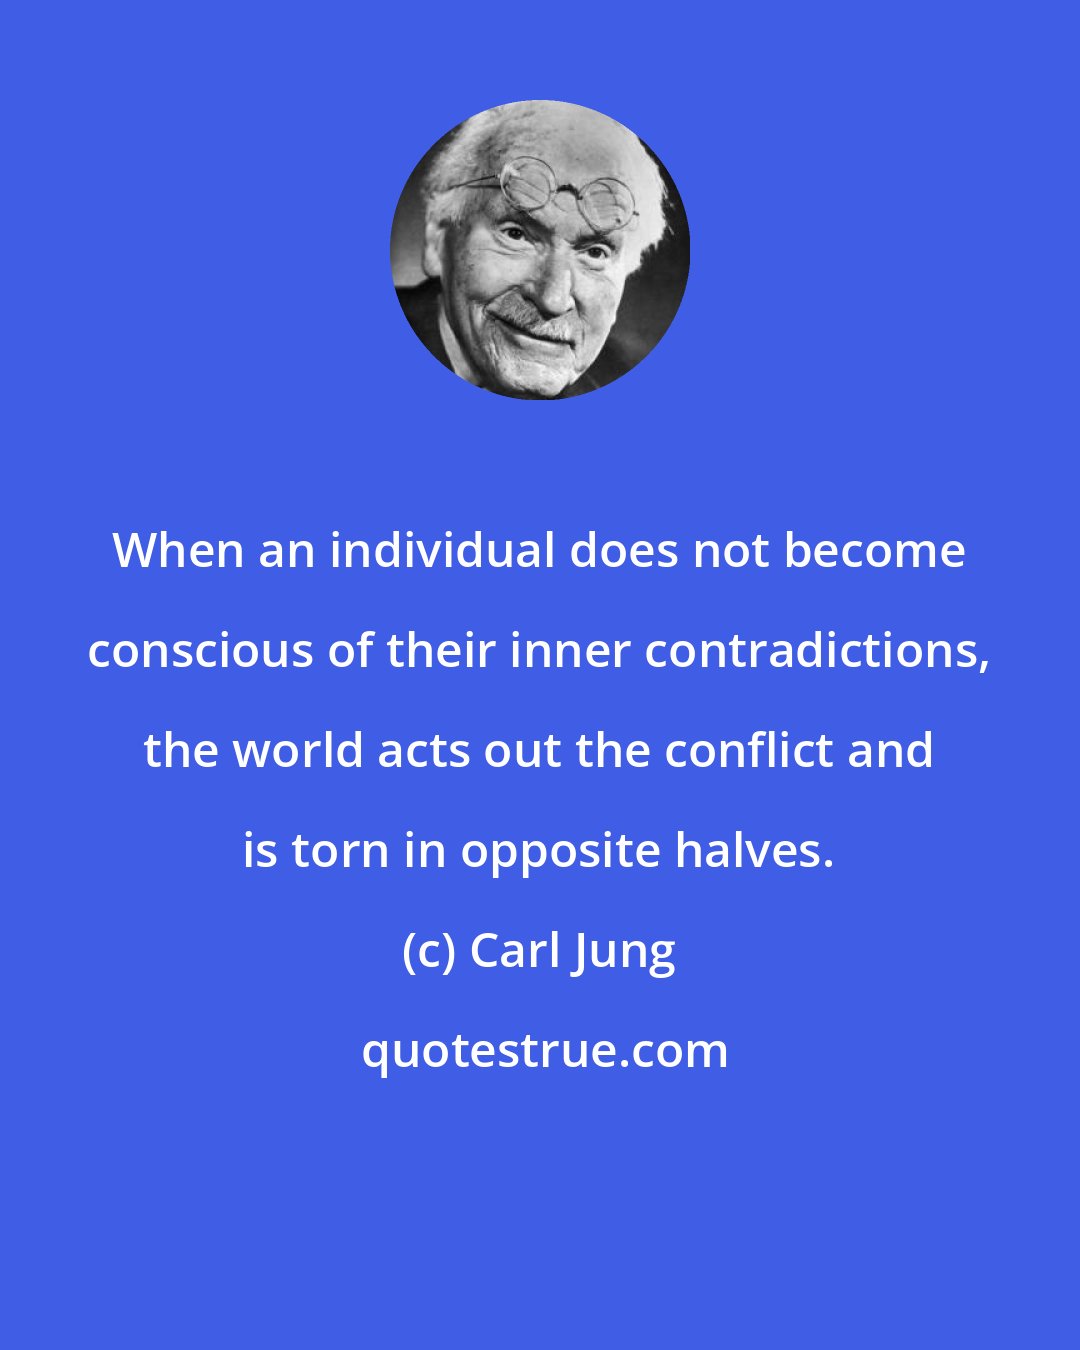 Carl Jung: When an individual does not become conscious of their inner contradictions, the world acts out the conflict and is torn in opposite halves.